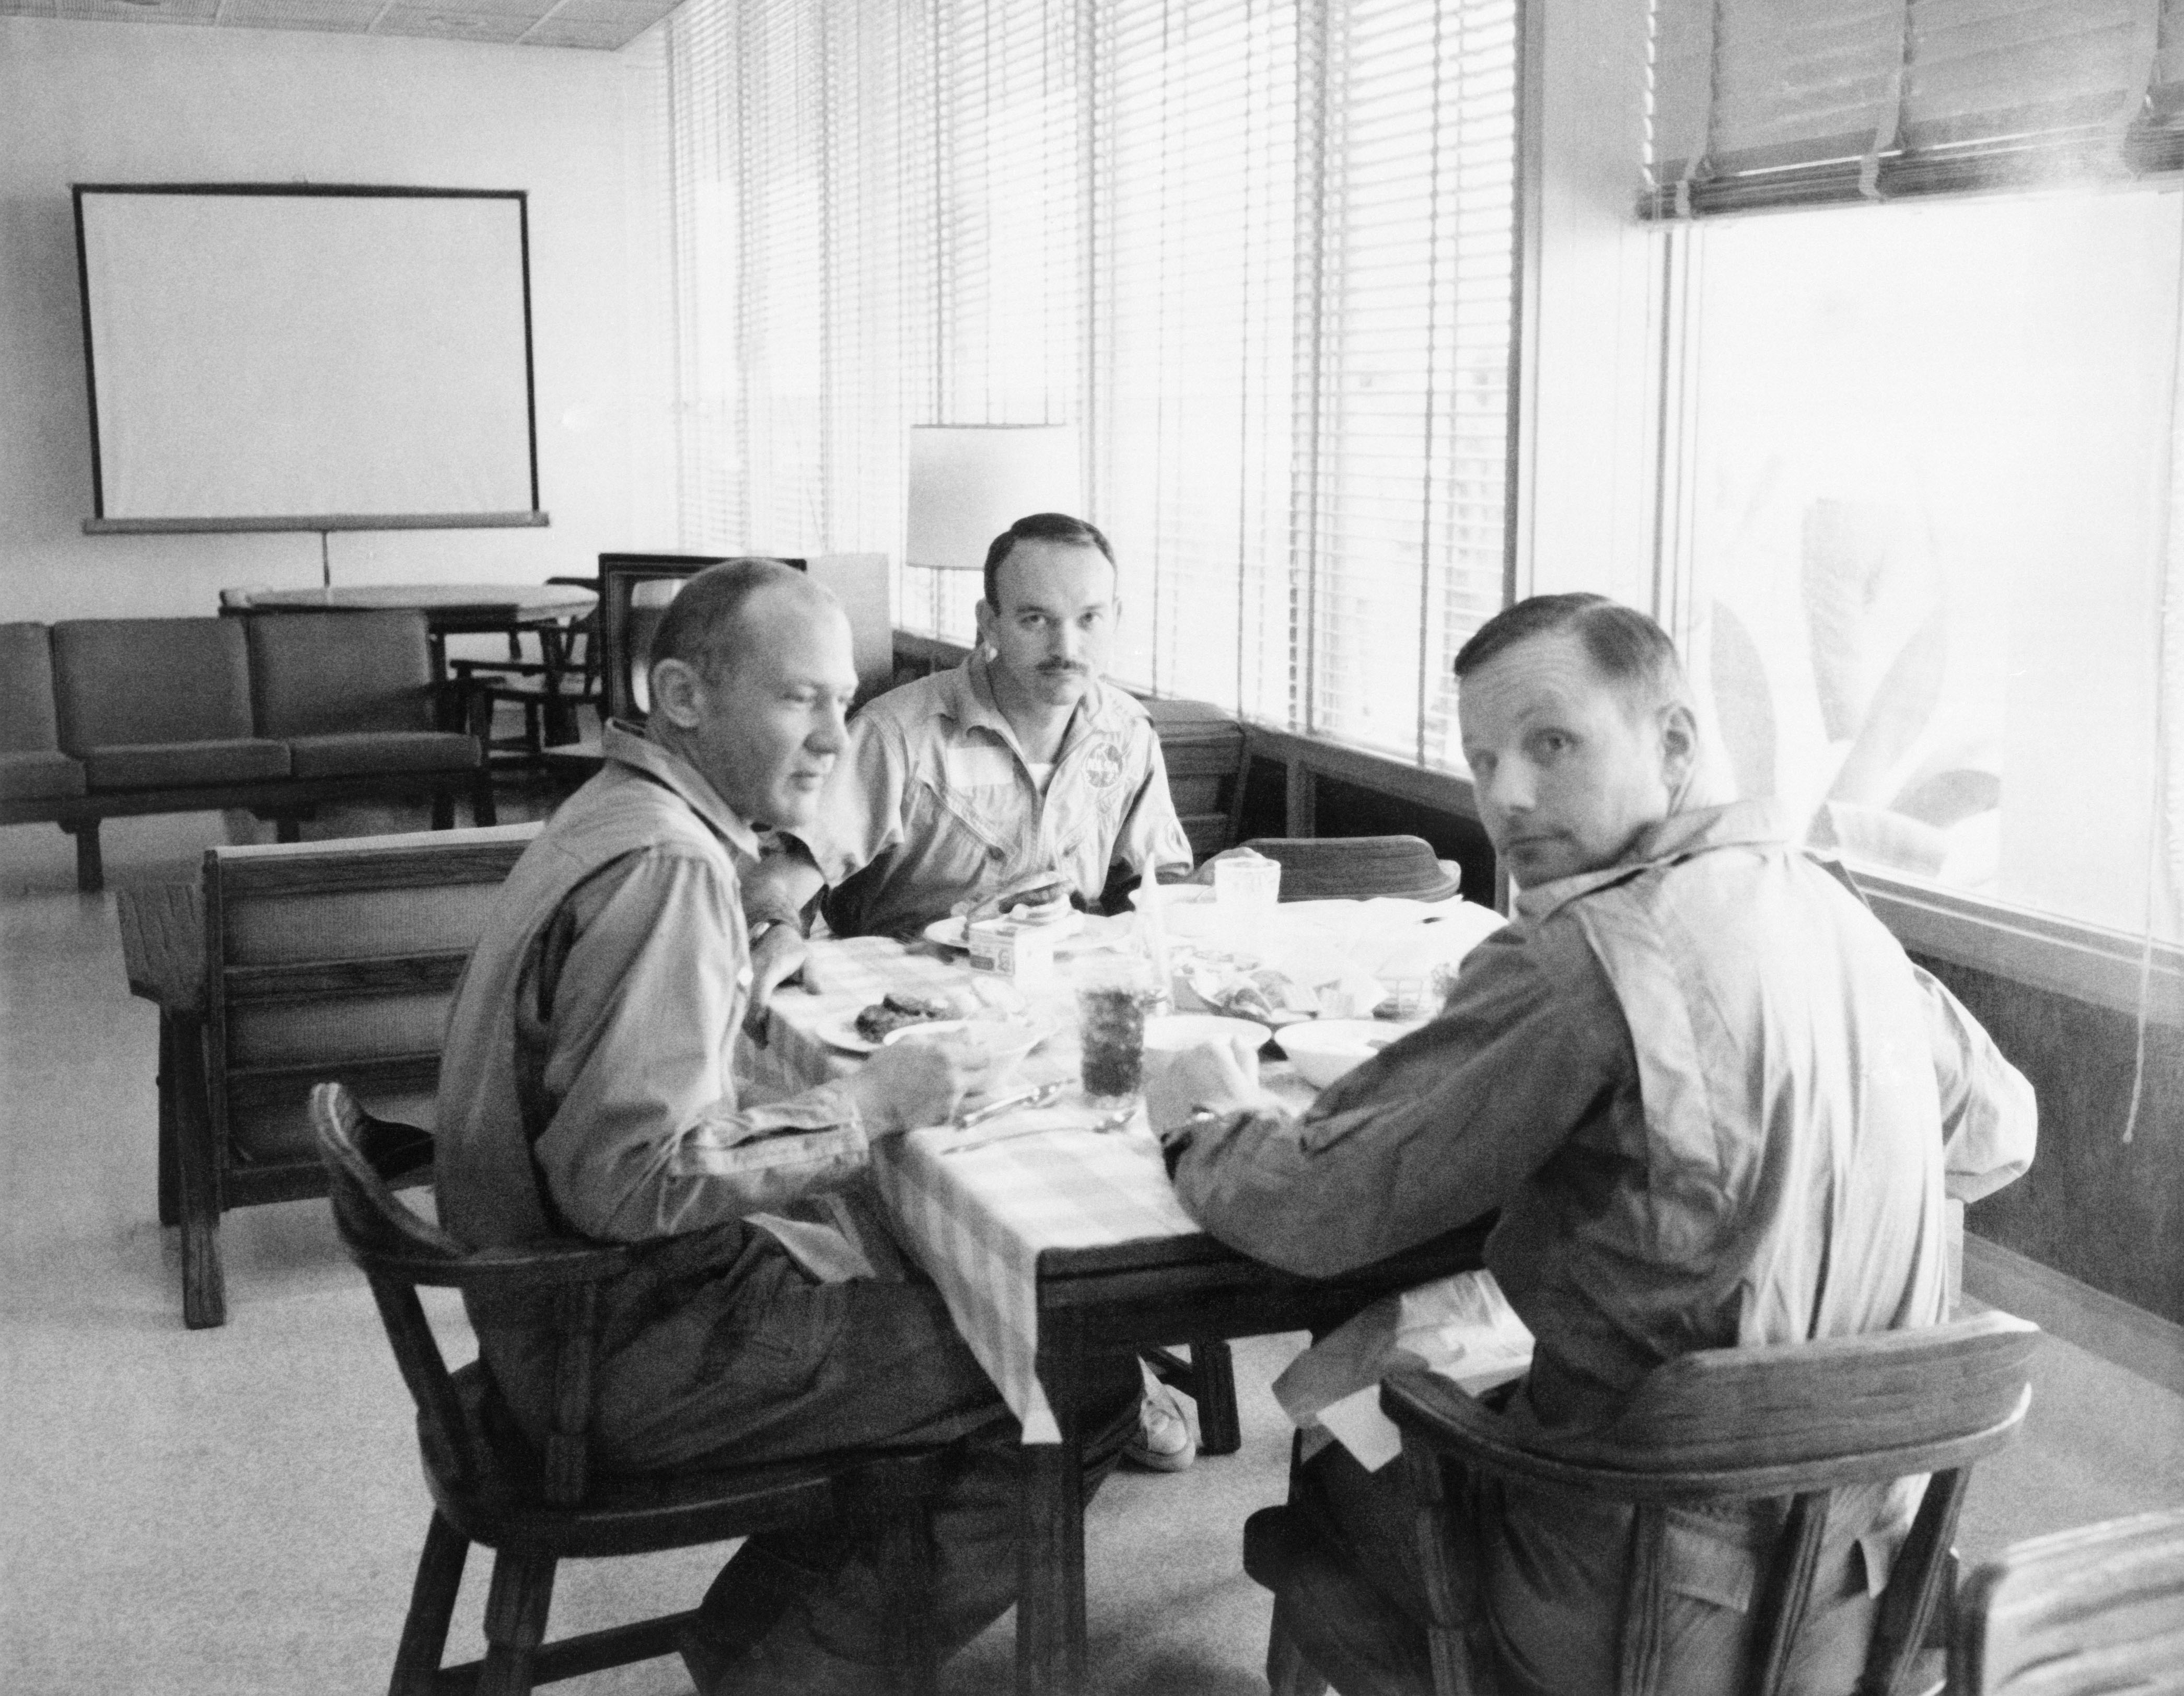 Apollo 11 crewmen dine in an isolate quarantine quarters in the Crew Reception Area of the Lunar Receiving Laboratory of the Manned Spacecraft Center on July 30, 1969.